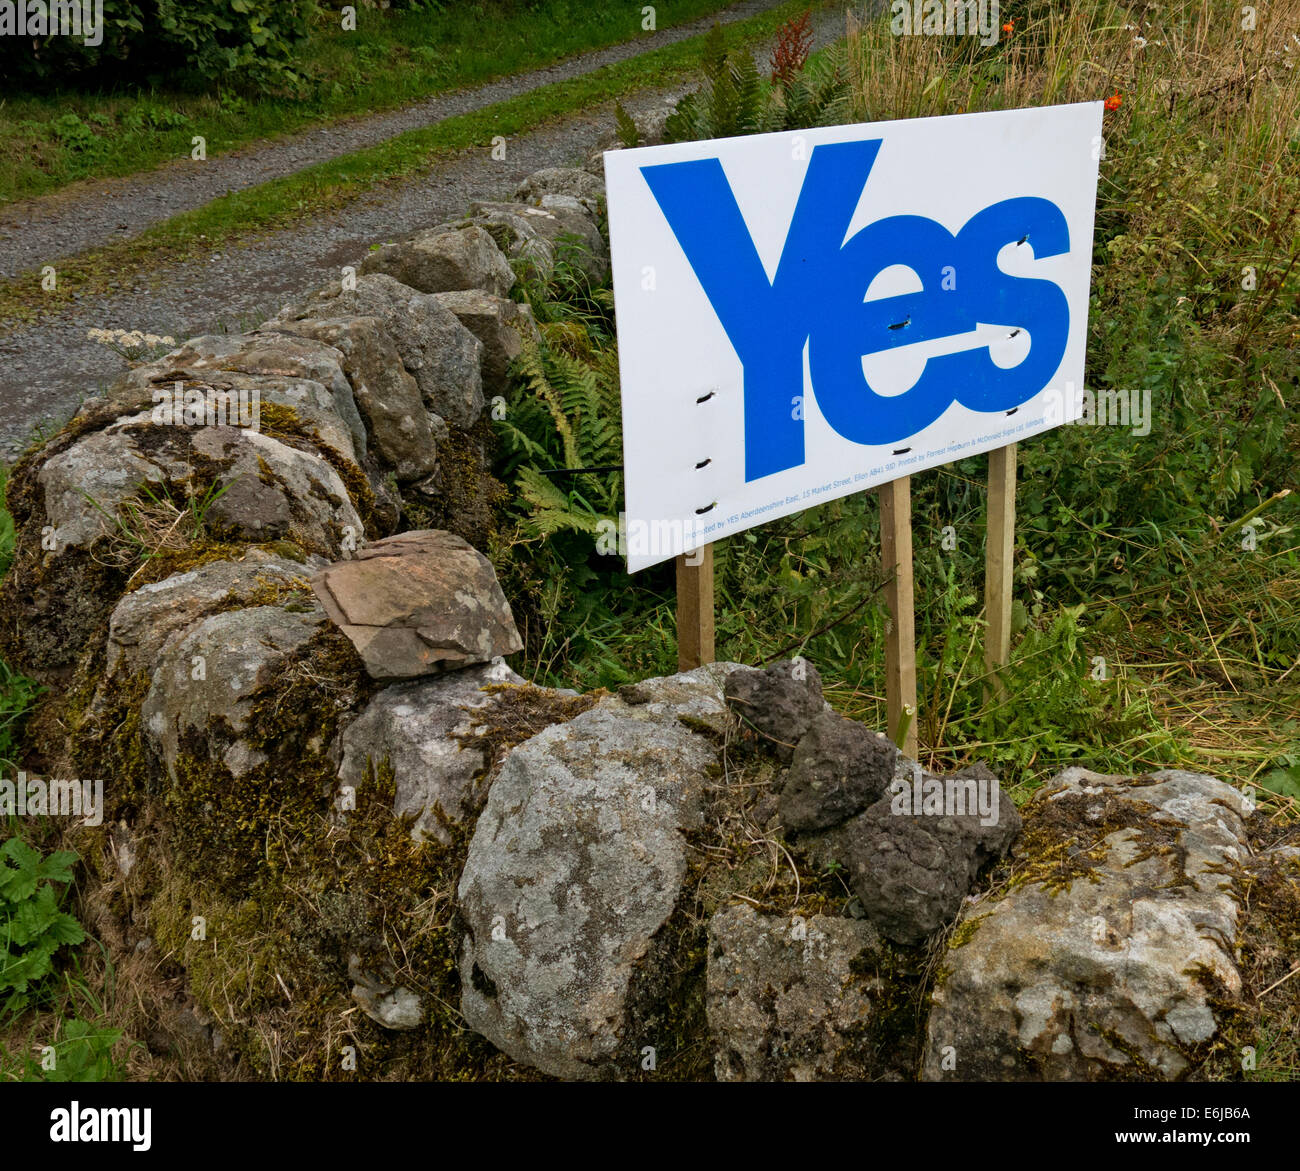 Yes to Scottish independence sign at Carlophill farm, Carlops, Scottish Borders, Scotland September 2014 Stock Photo